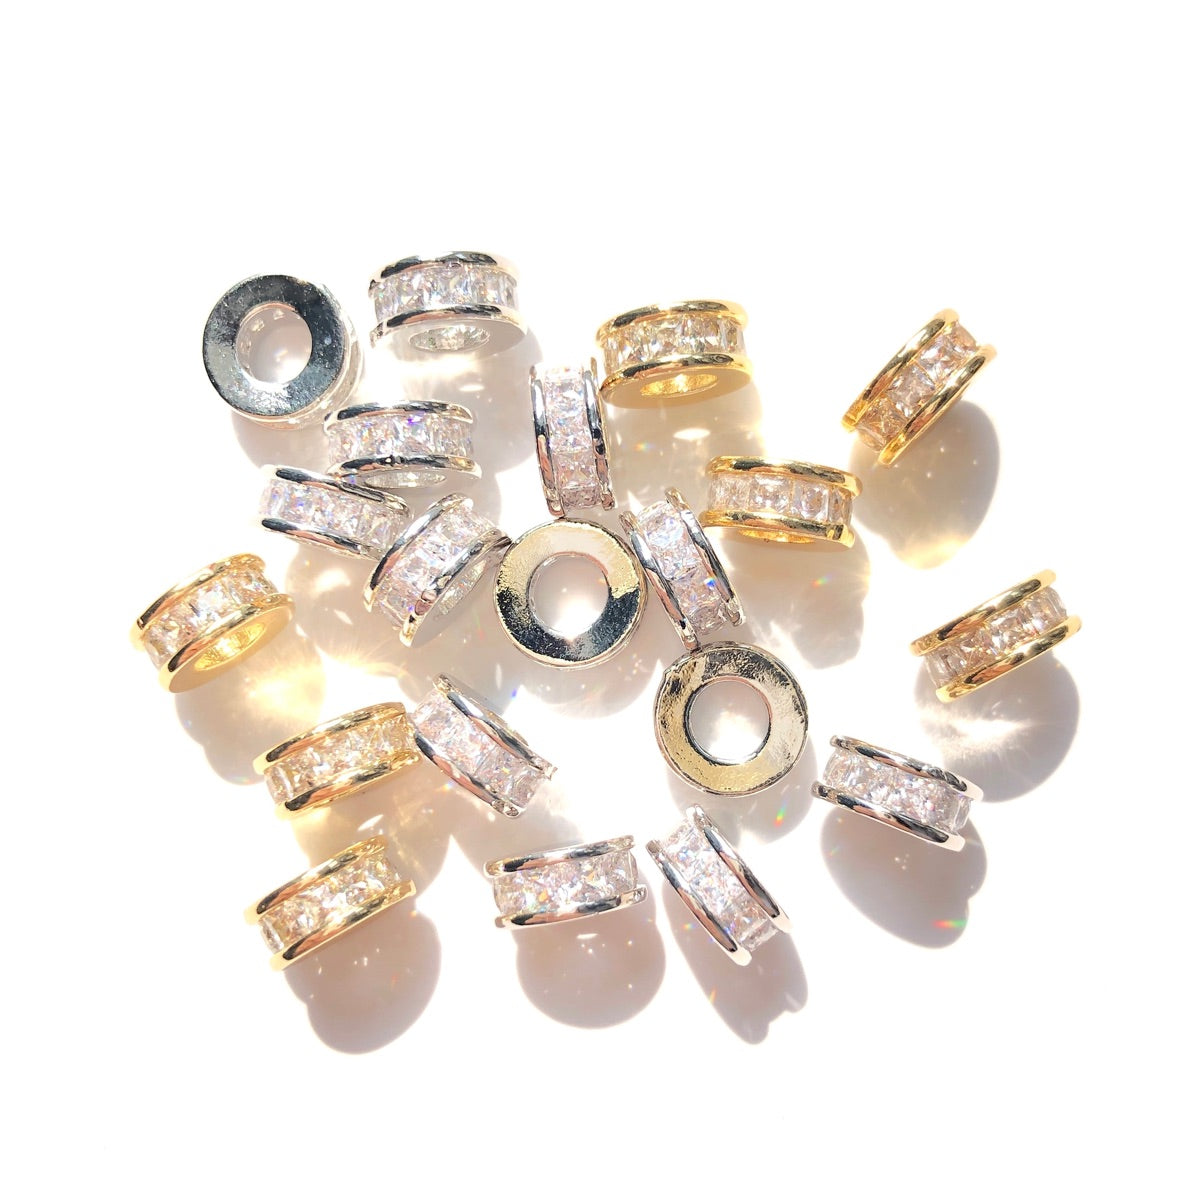 20-50pcs/lot 8*3.5mm Square CZ Paved Rondelle Wheel Spacers Mix Colors CZ Paved Spacers Big Hole Beads New Spacers Arrivals Rondelle Beads Wholesale Charms Beads Beyond